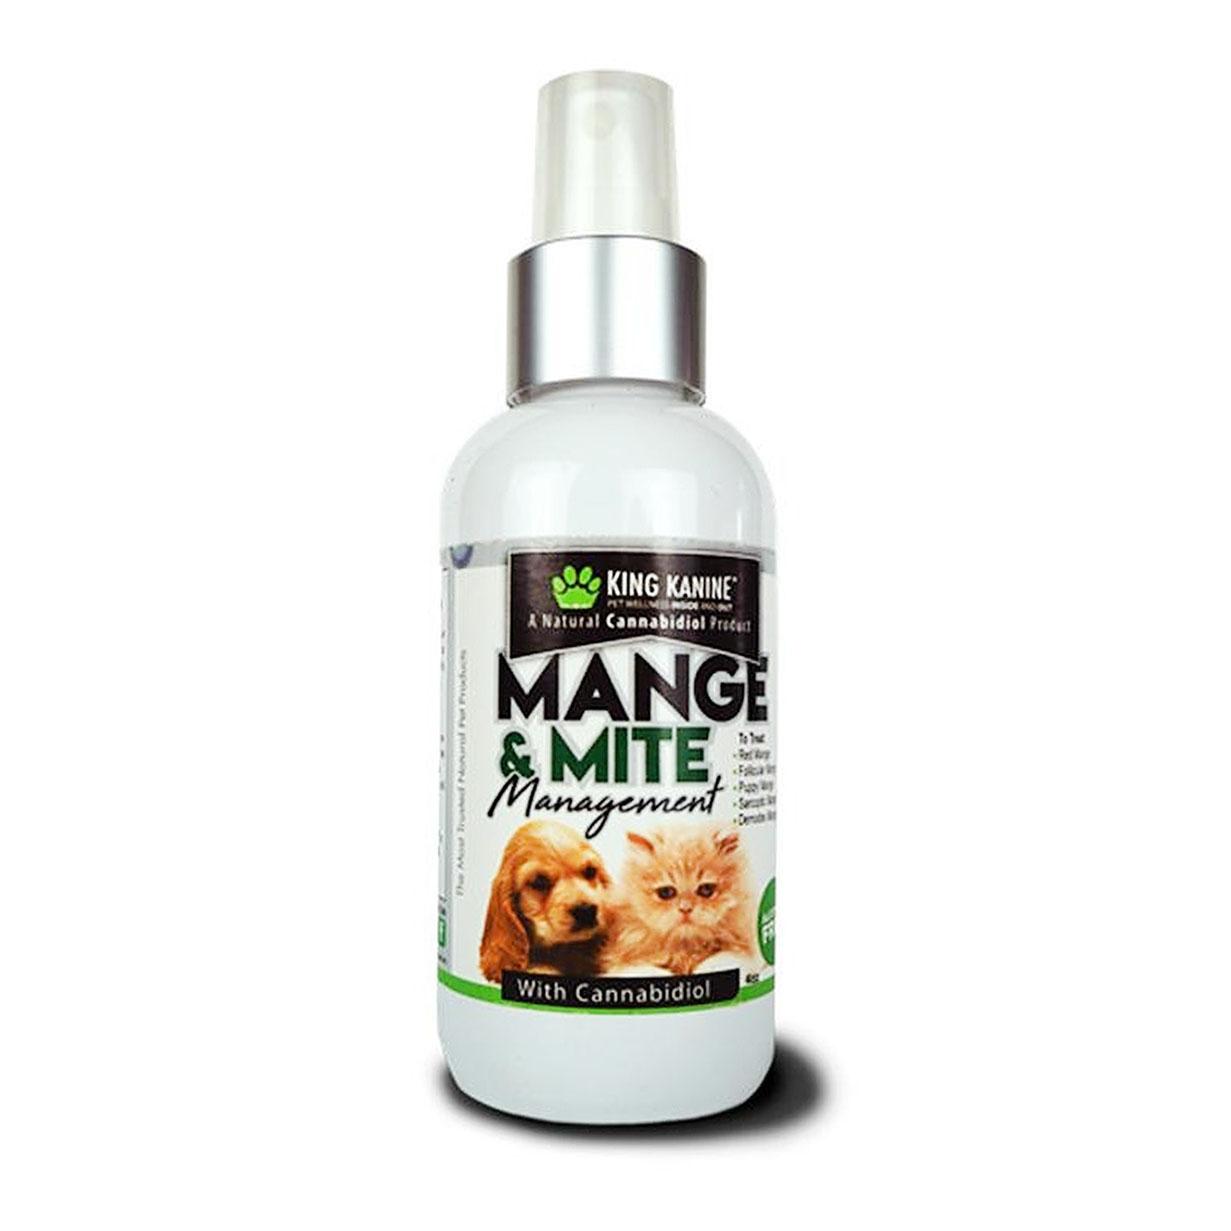 King Kanine Mange & Mite Management for Dogs and Cats